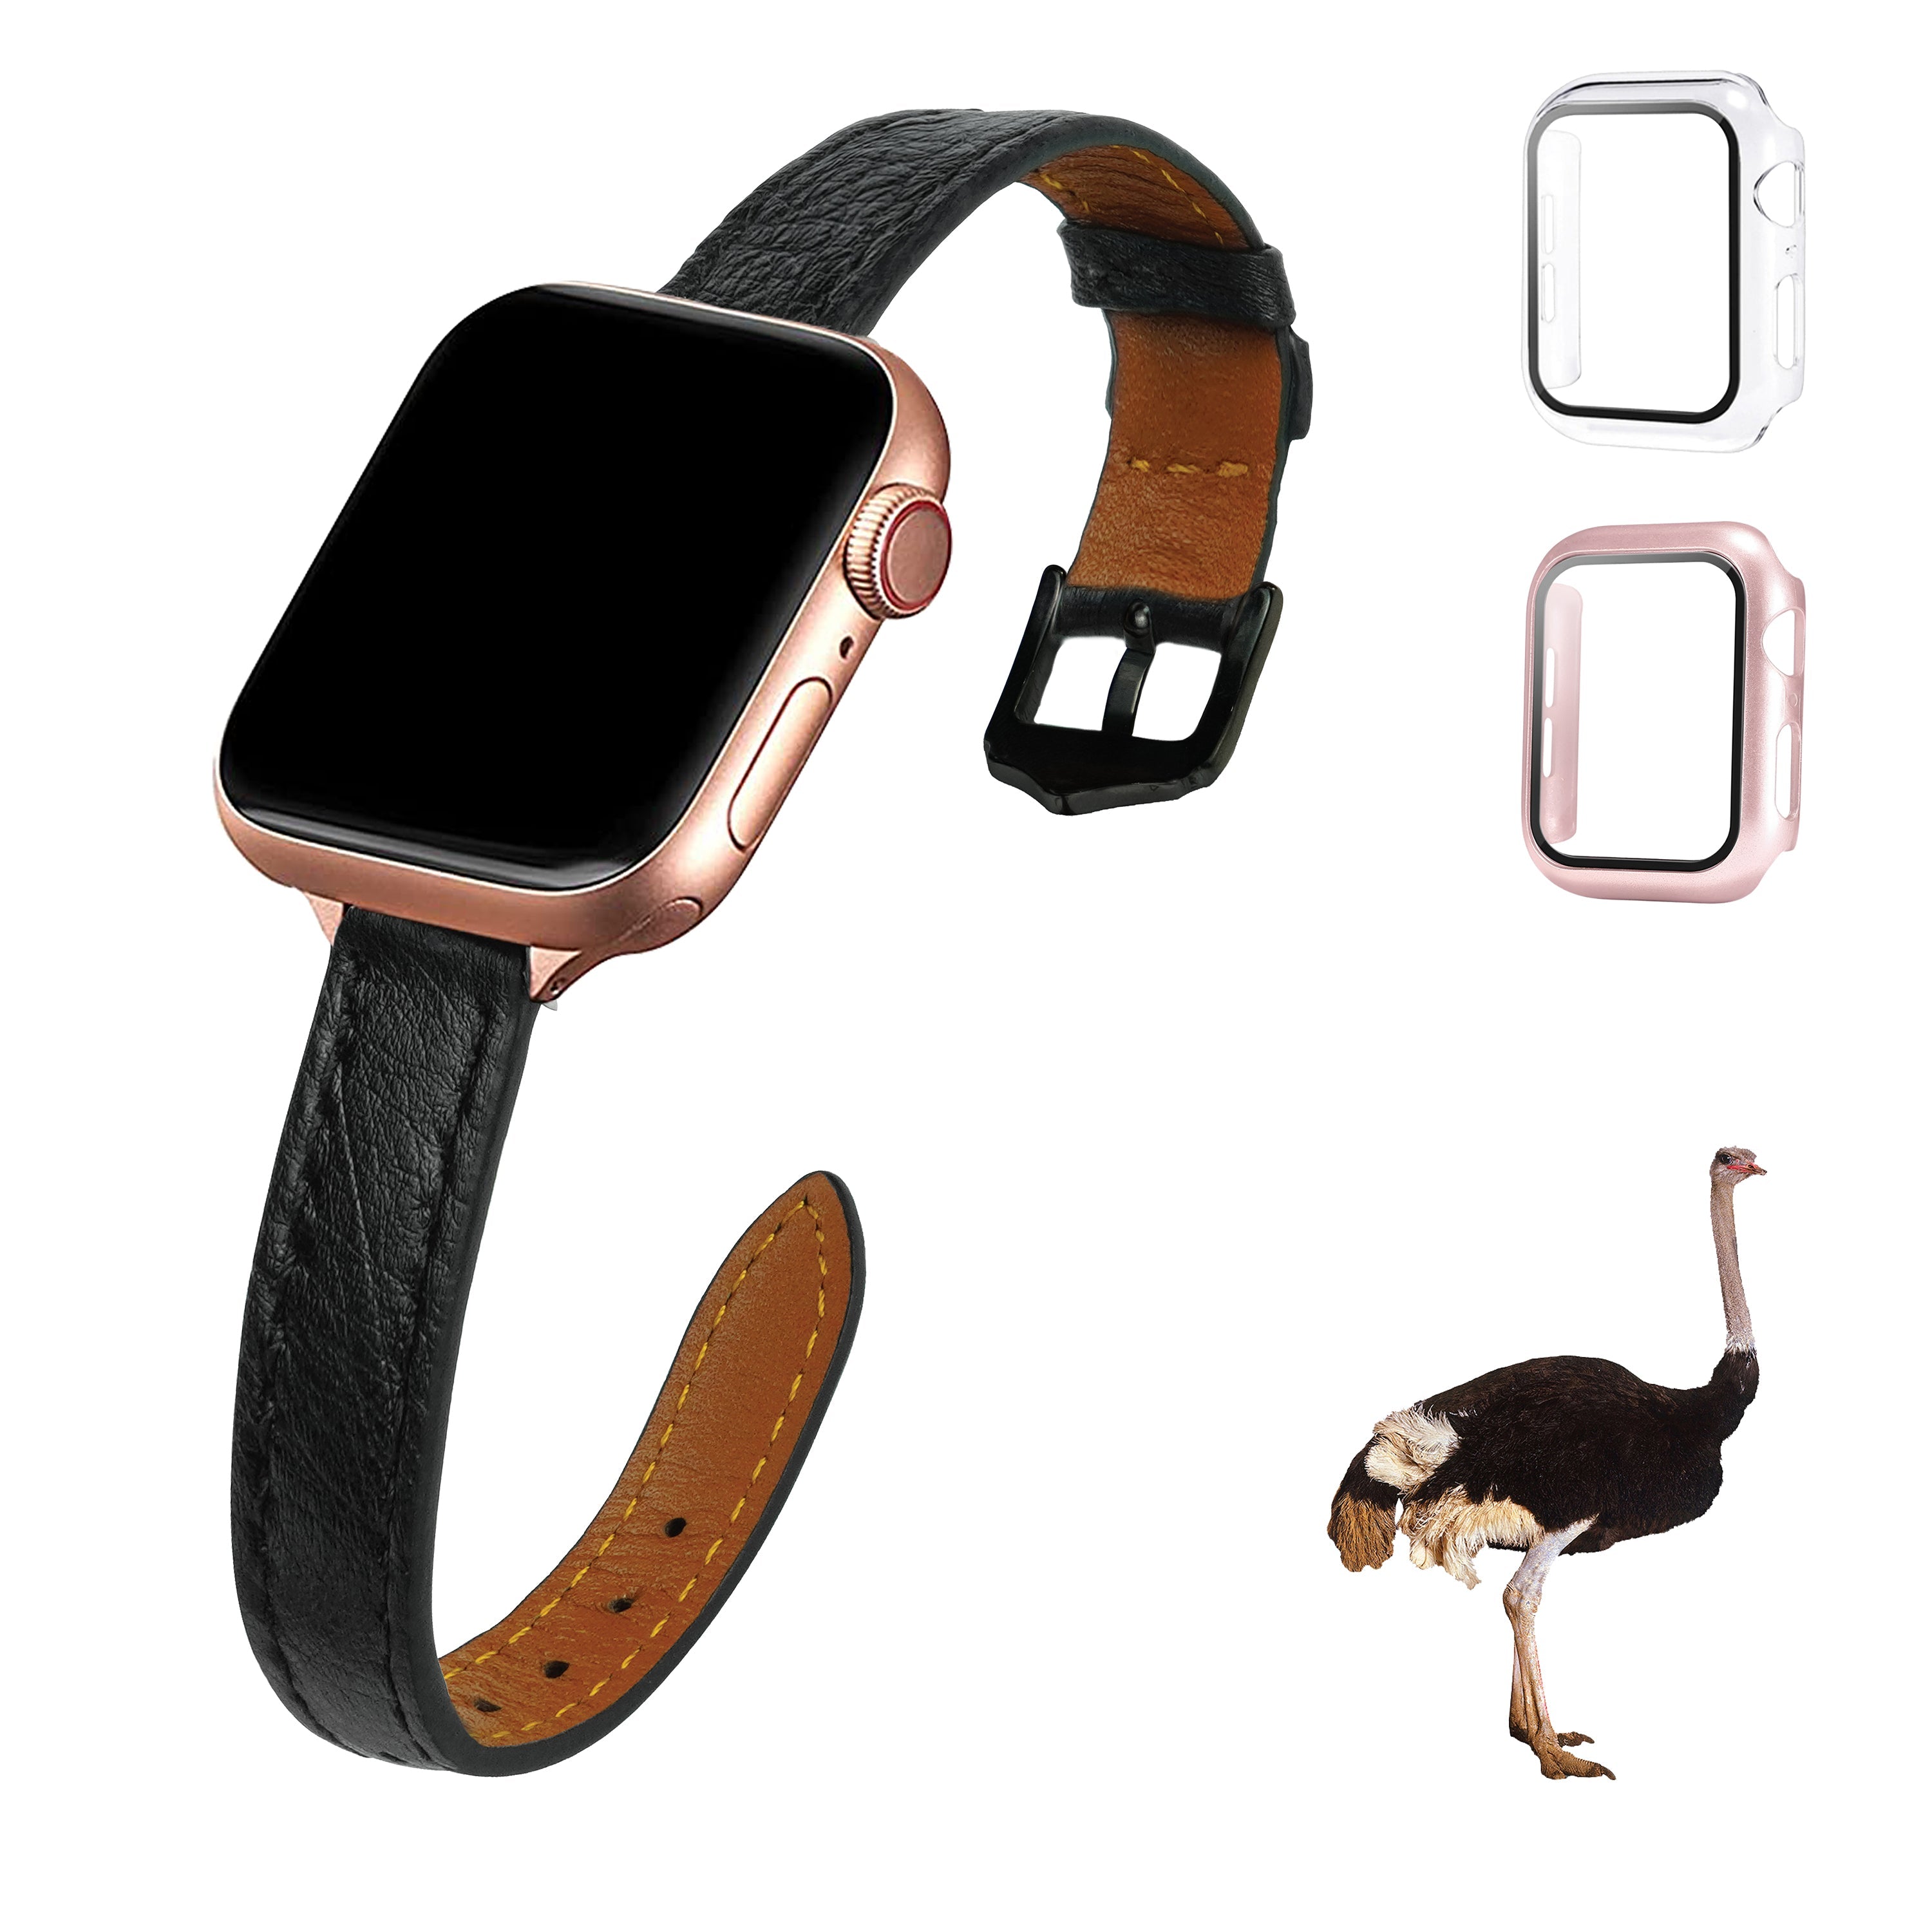 Black Flat Ostrich Leather Band Compatible Apple Watch Iwatch 38mm Screen Protector Case Gold Adapter Replacement Strap For Smartwatch Series 1 2 3 Leather Handmade AW-181G-W-38MM